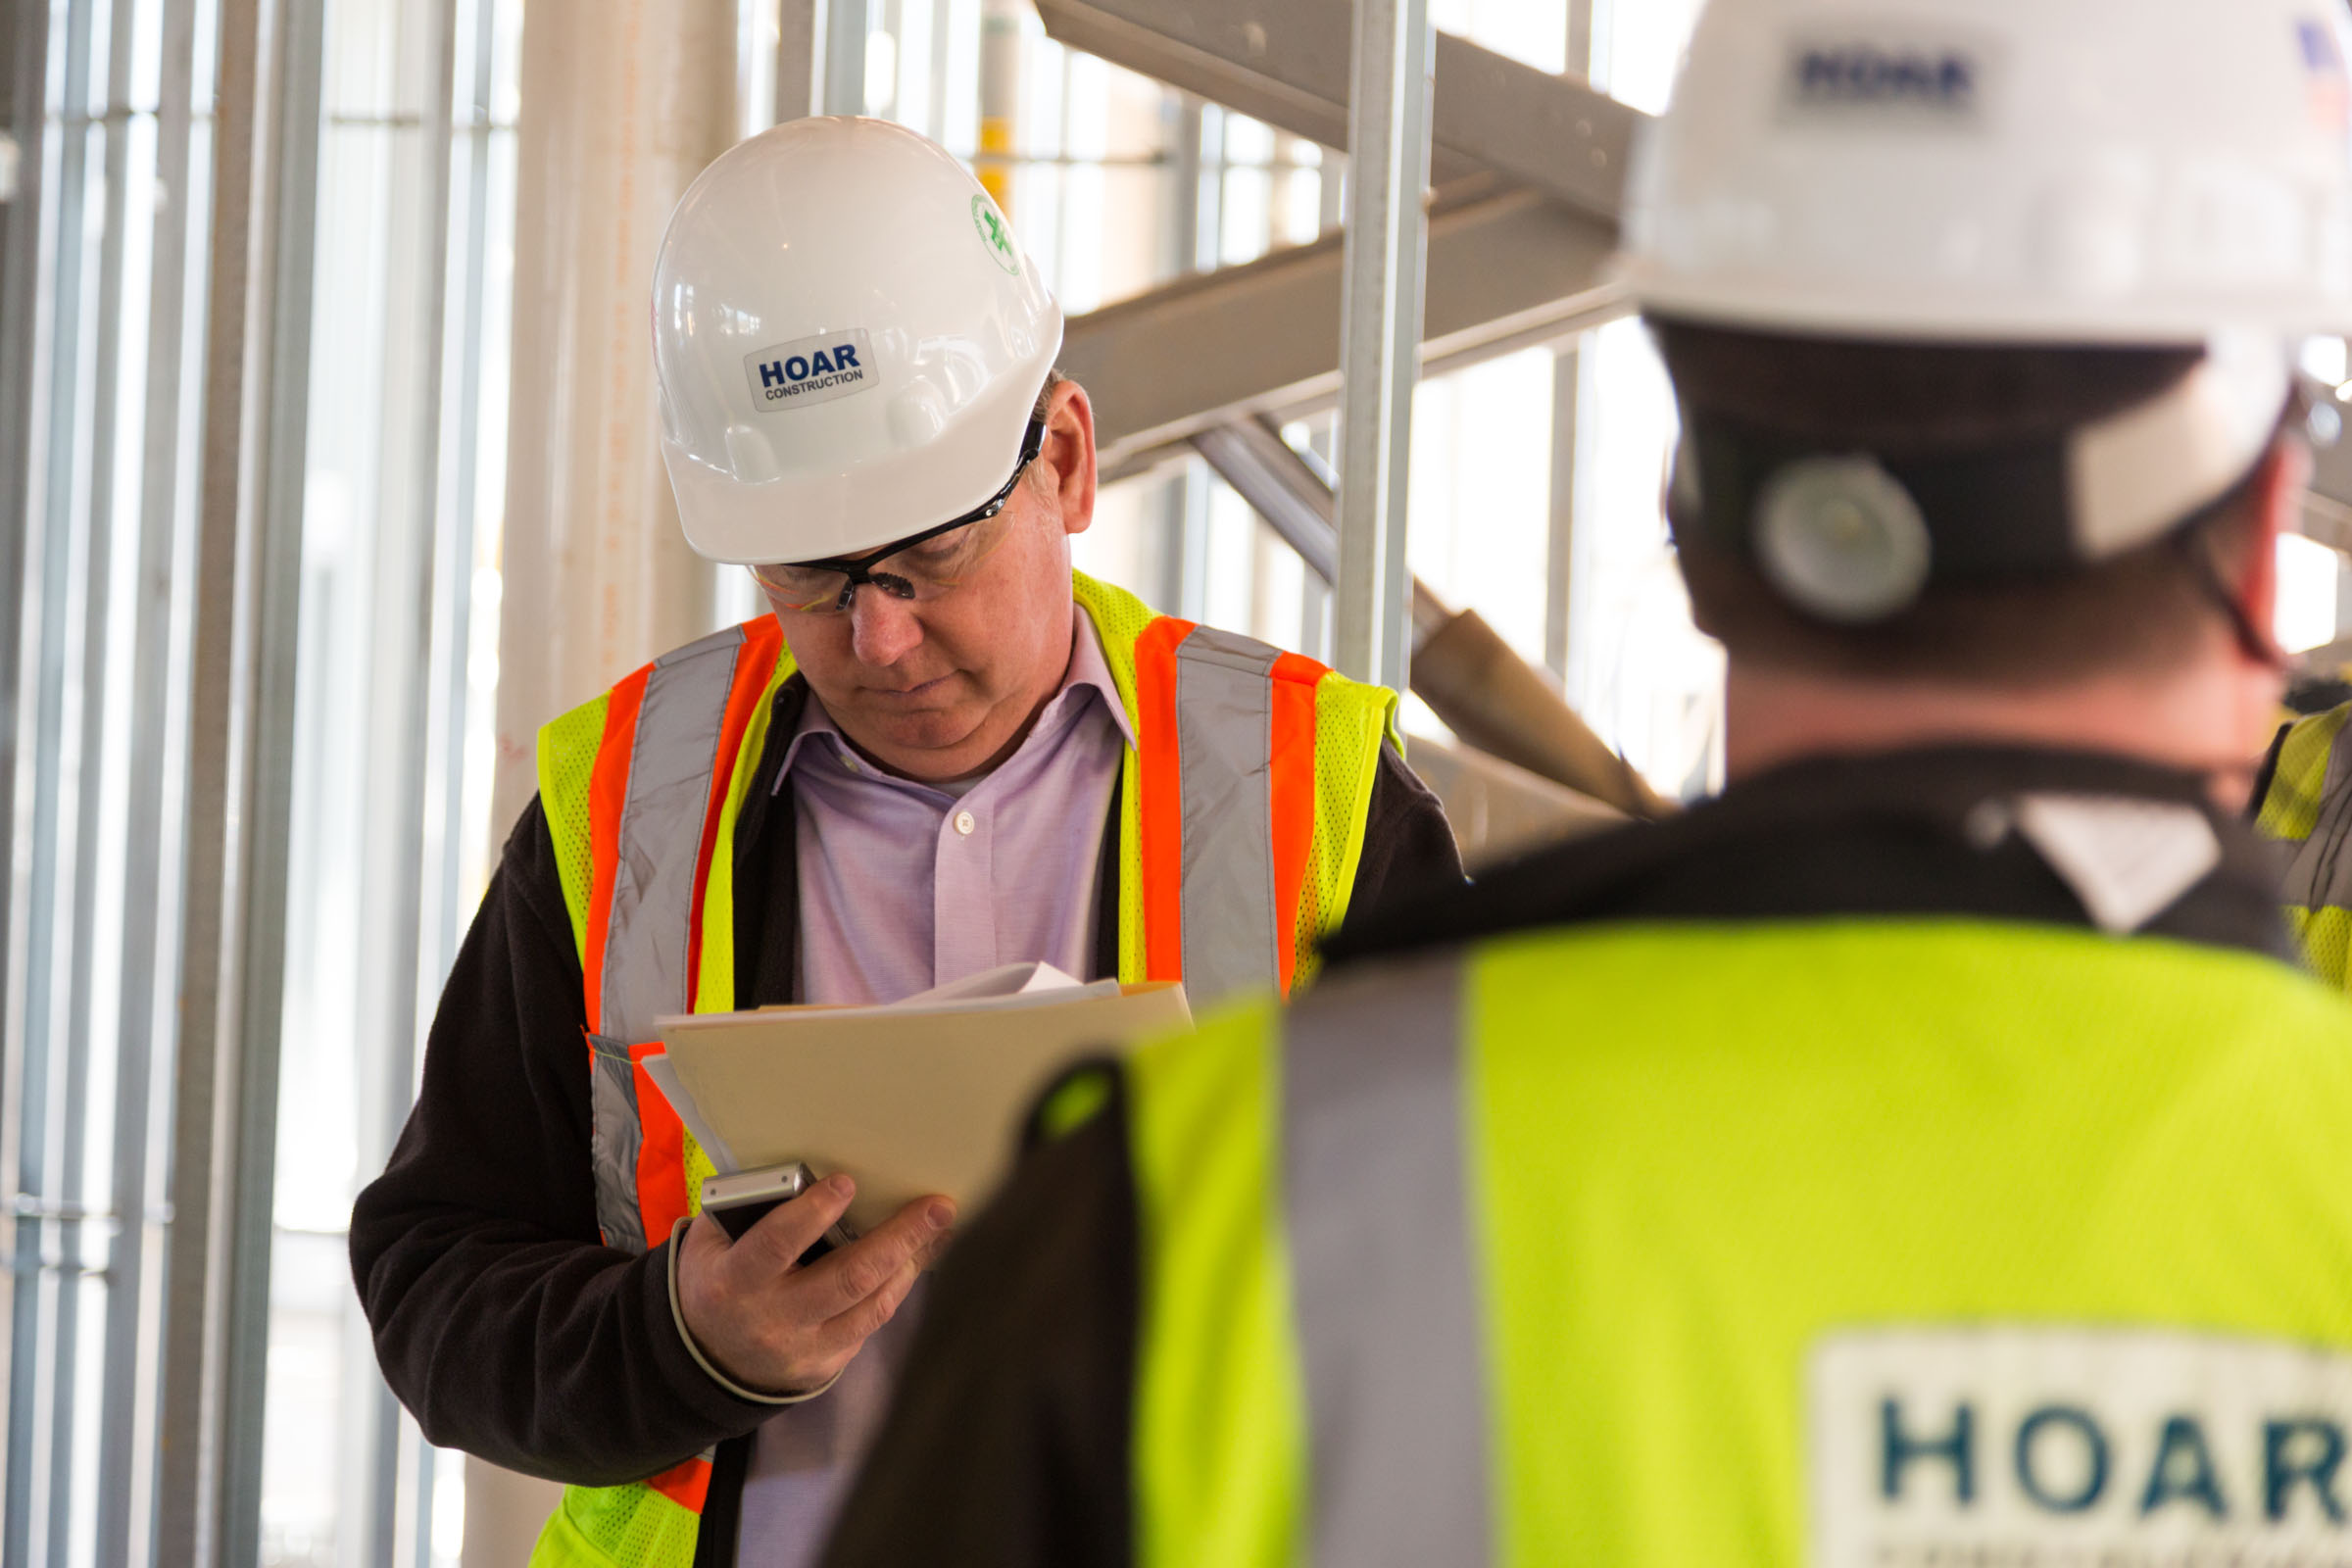 Hoar Construction Earned Designation as a Great Place to Work-Certified™ Company in 2019                                                                             